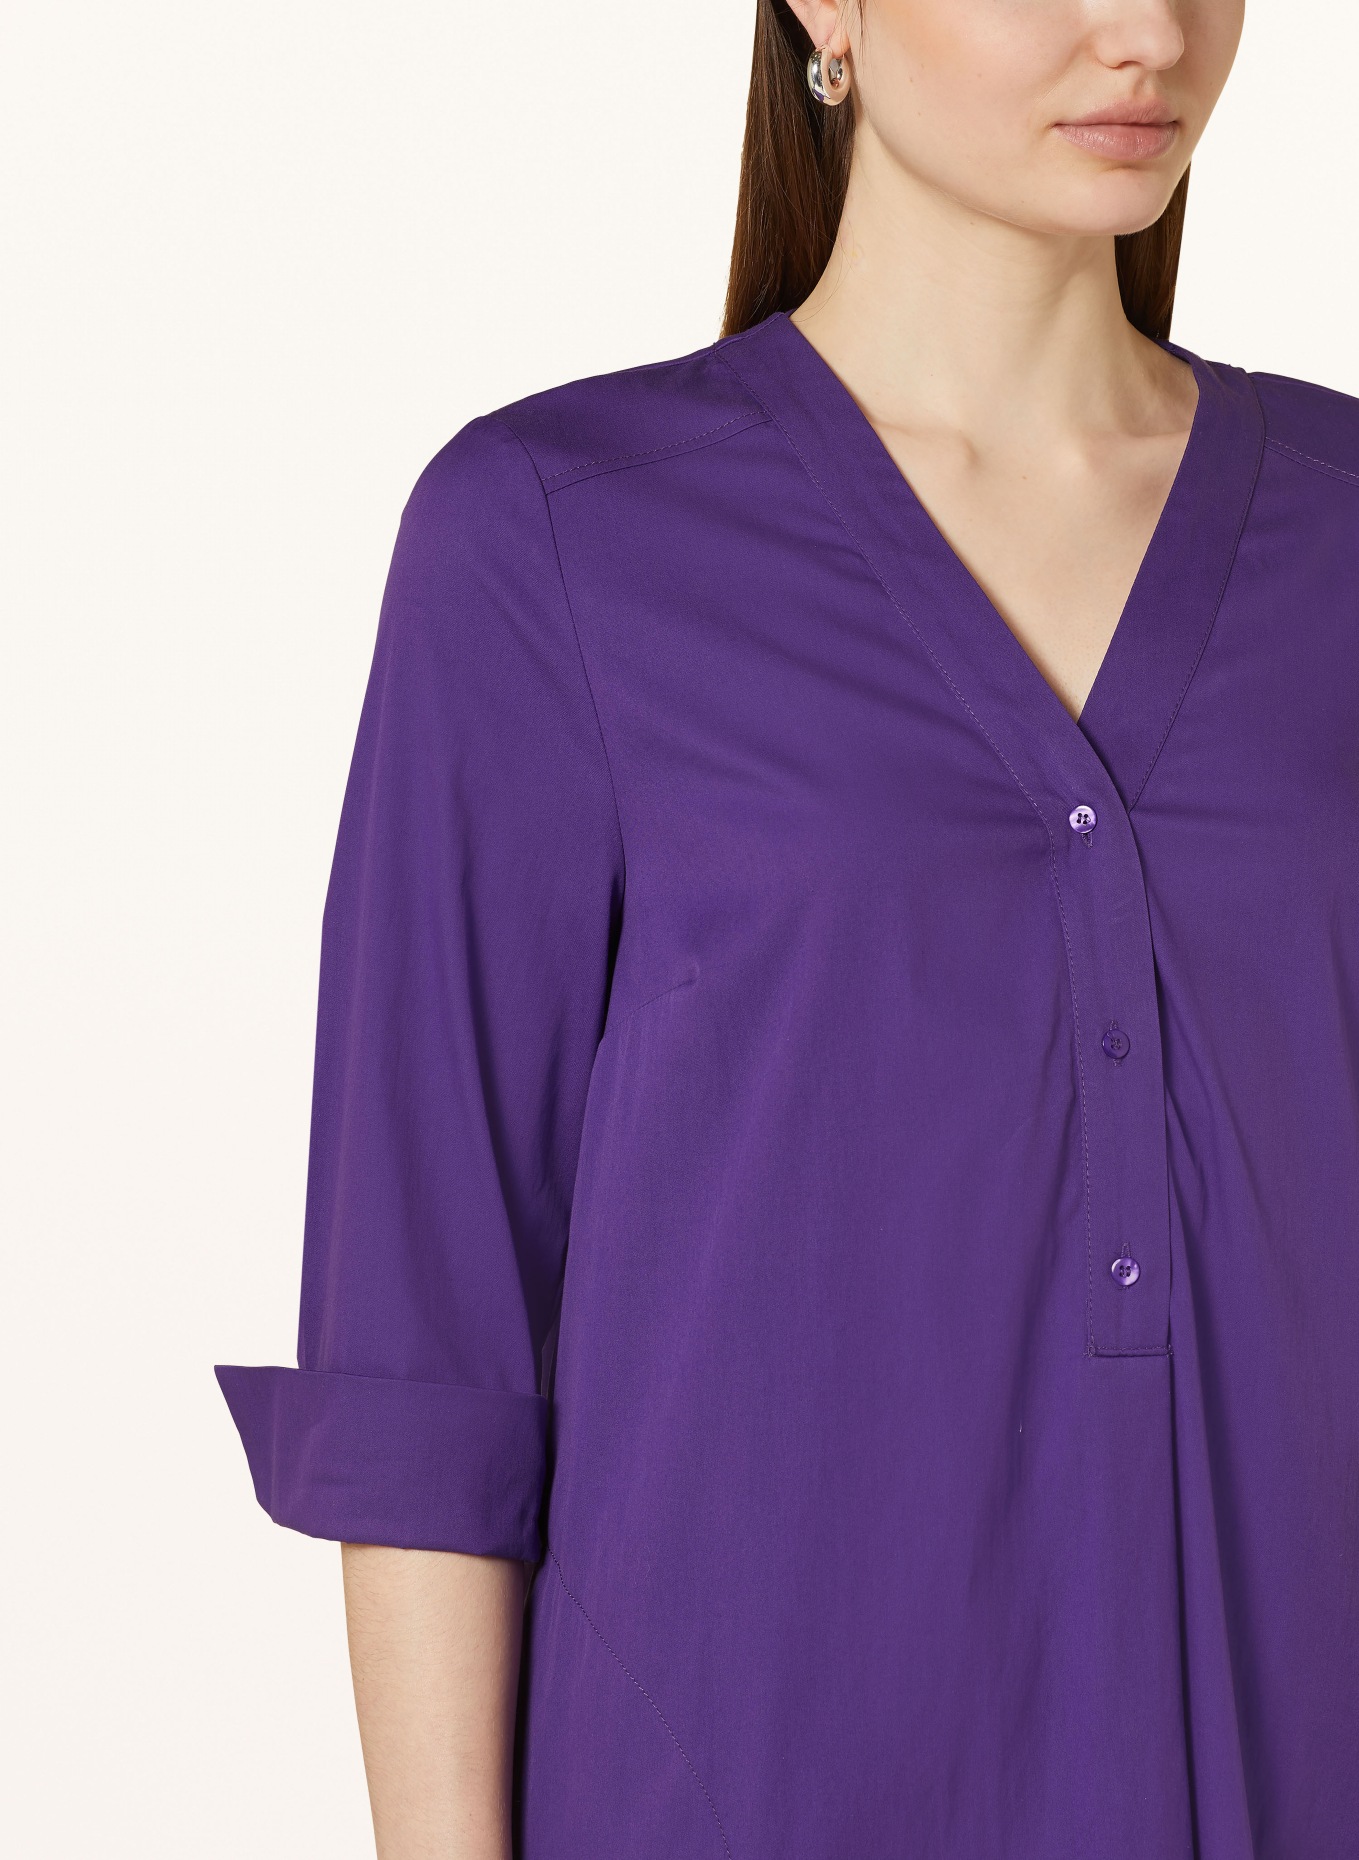 ROBE LÉGÈRE Dress with 3/4 sleeves, Color: PURPLE (Image 4)